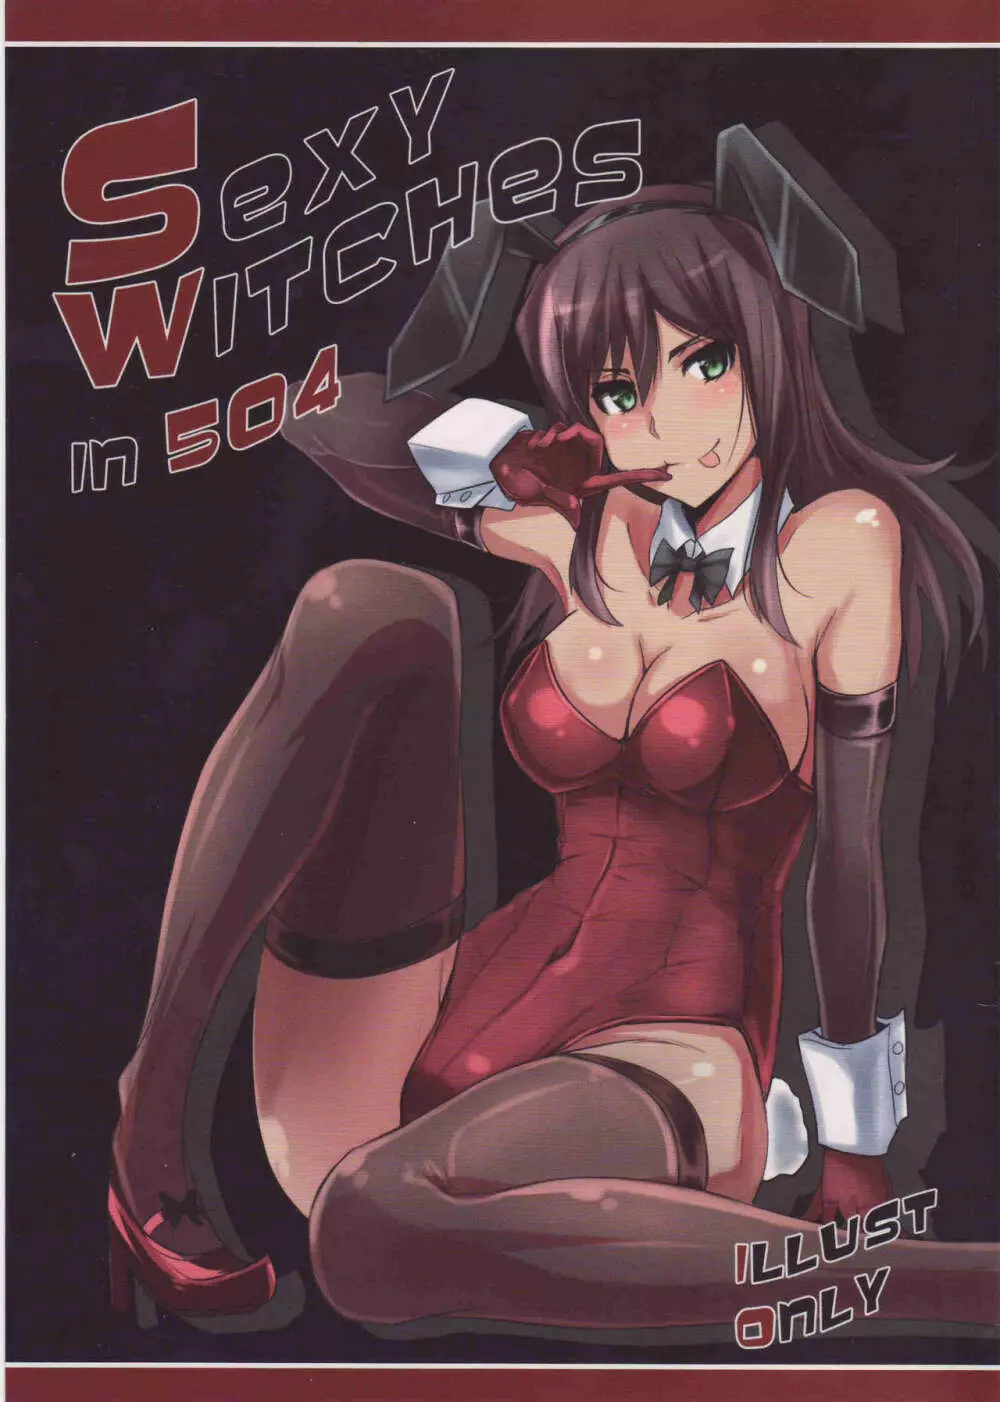 Sexy Witches in 504